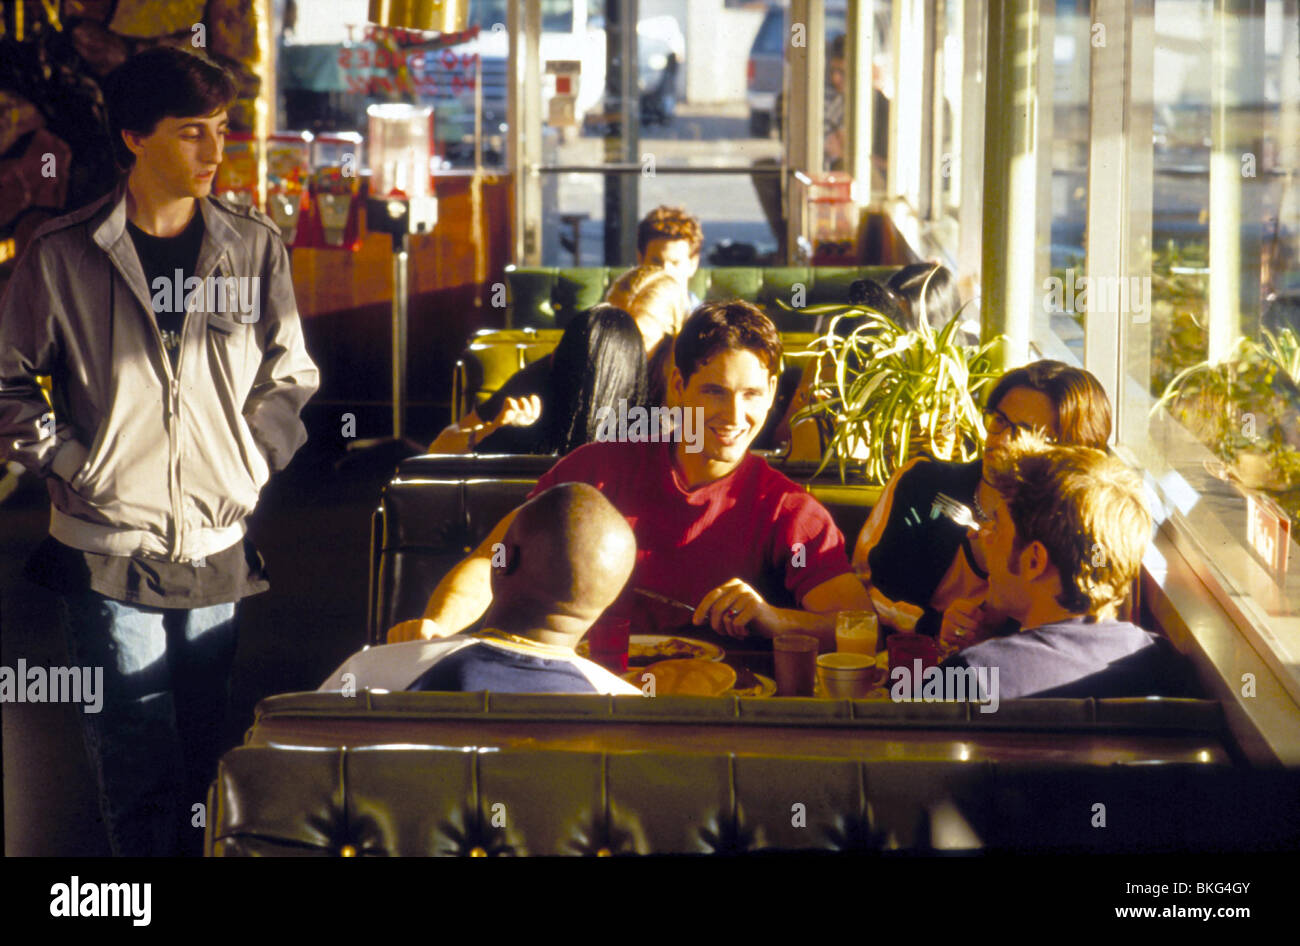 CAN'T HARDLY WAIT (1998) WILLIAM LICHTER, PETER FACINELLI CHW 005 Stock Photo